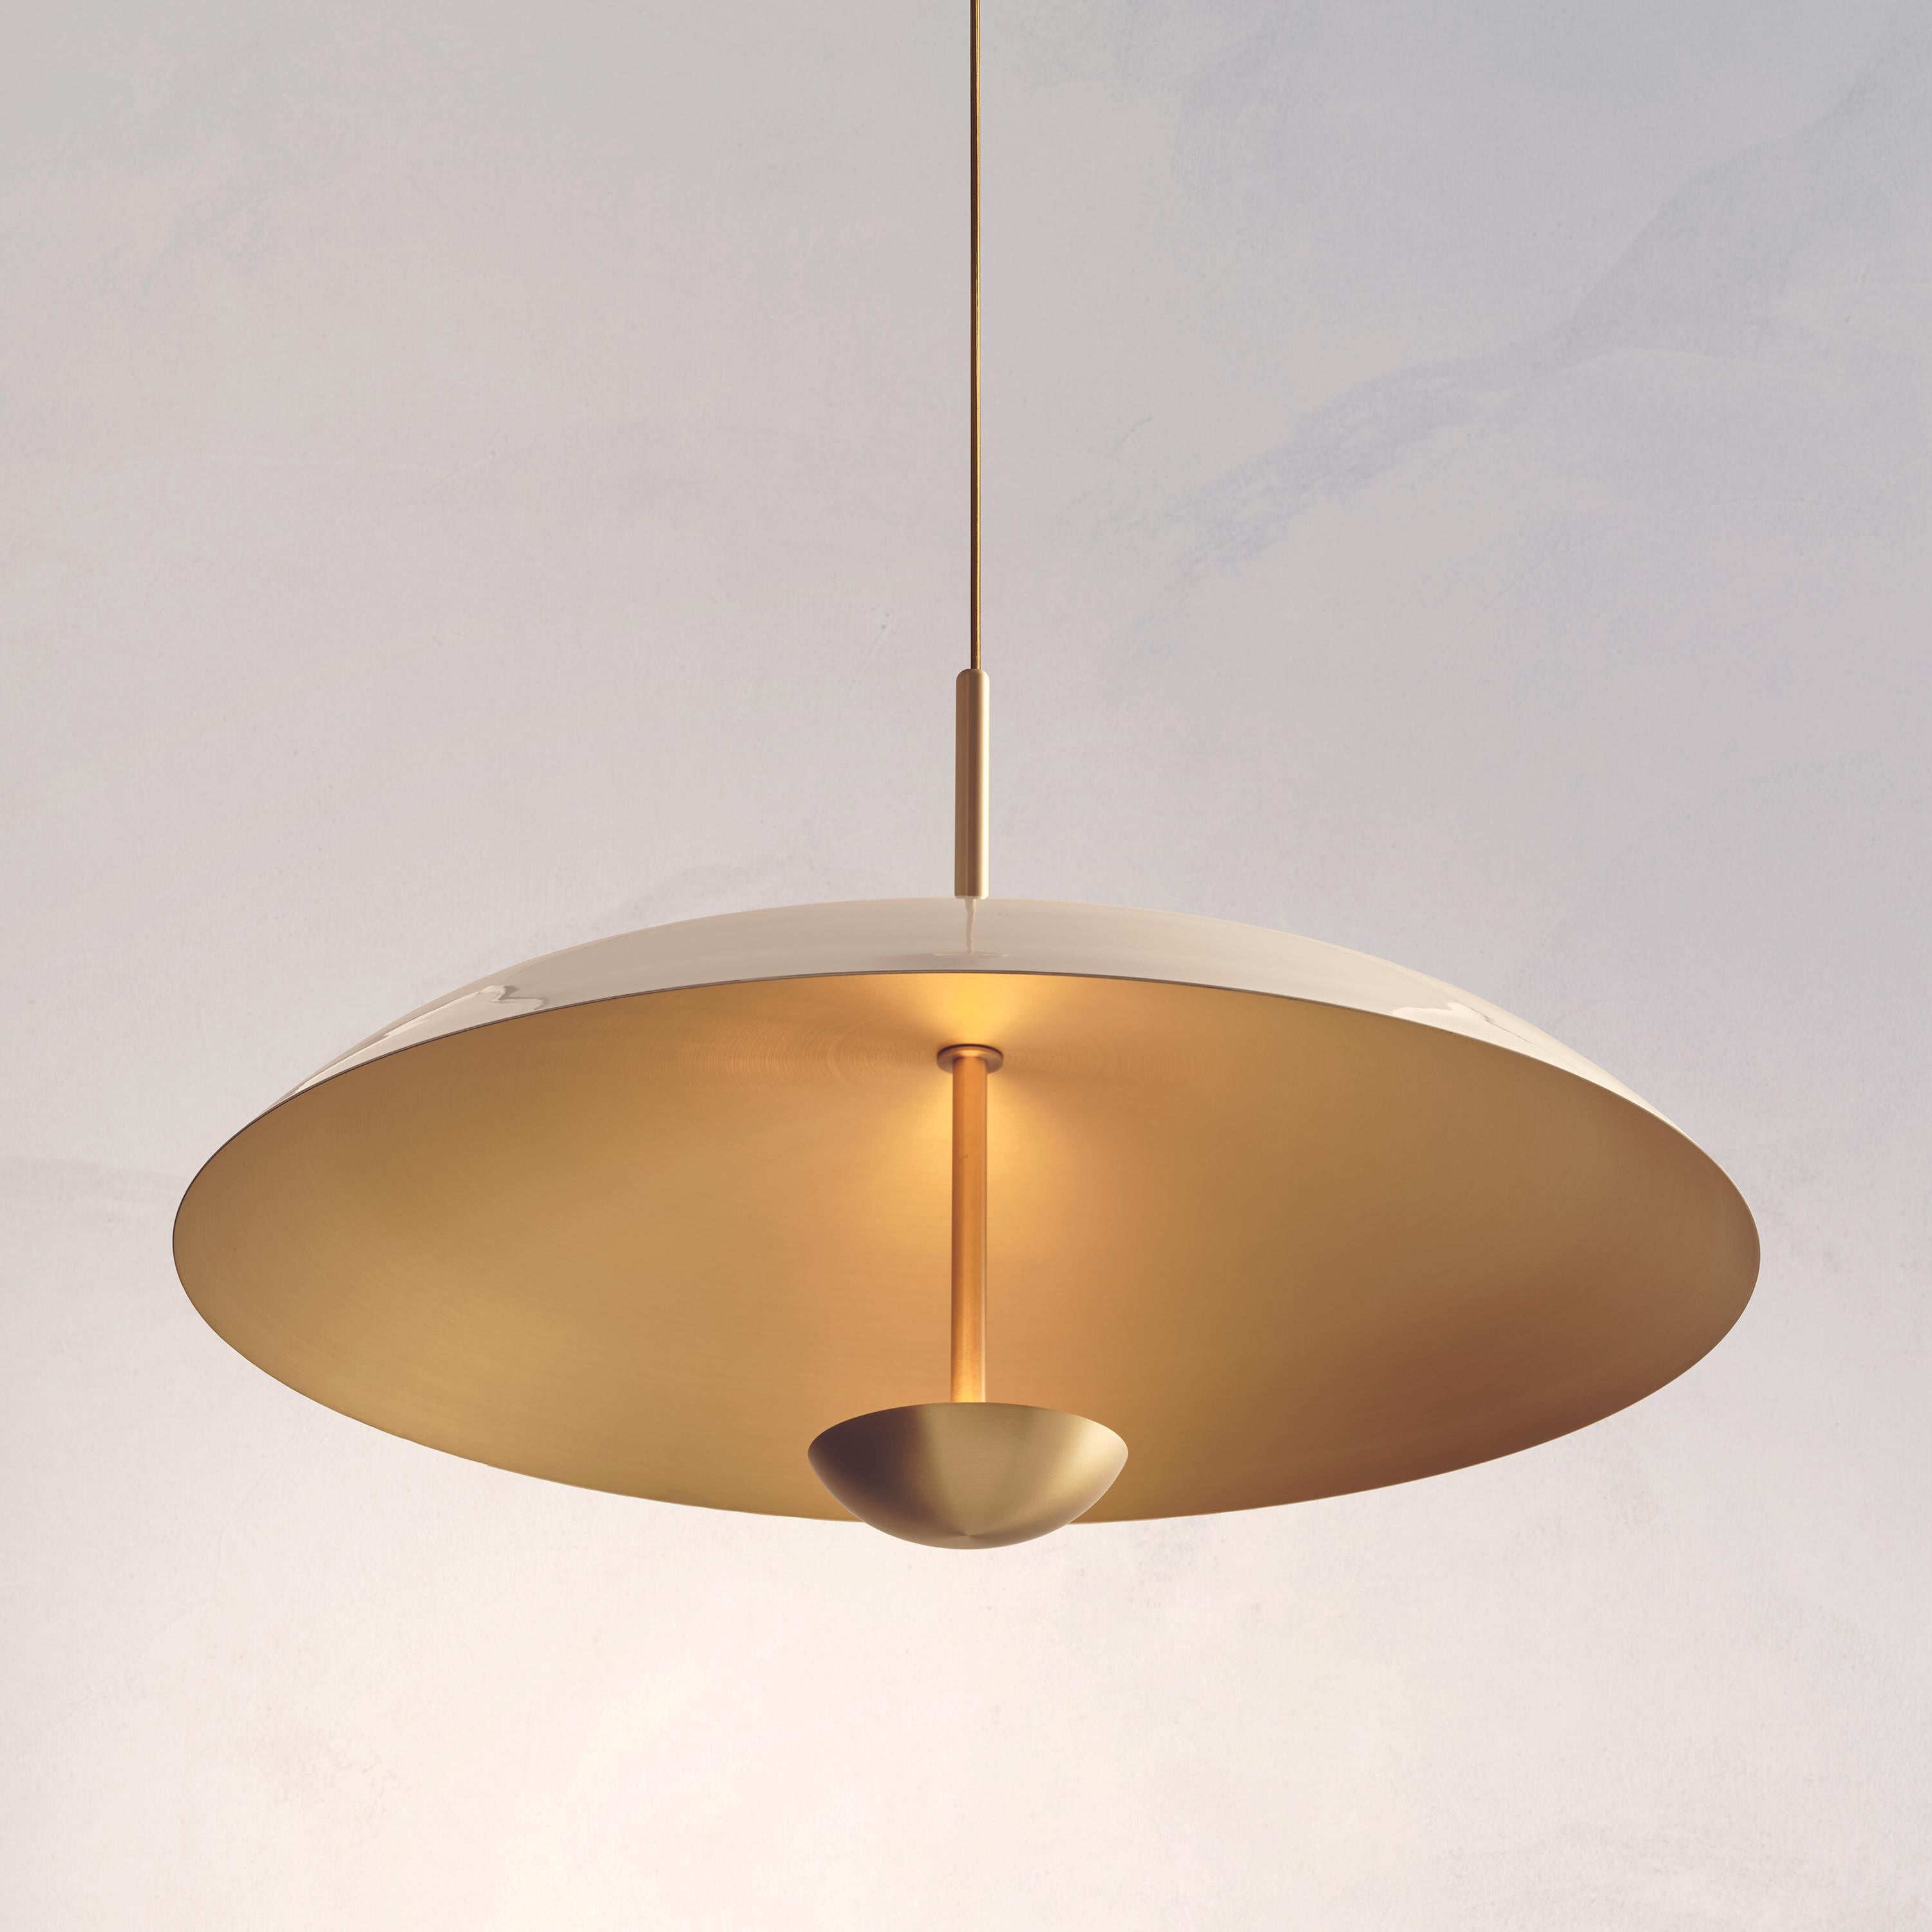 Two finely hand-spun brass plates make up this pendant light, finished in a gloss or matt white lacquer to create this unique appearance. Please note the process is random and each plate has a slightly variant finish. The light is projected into the